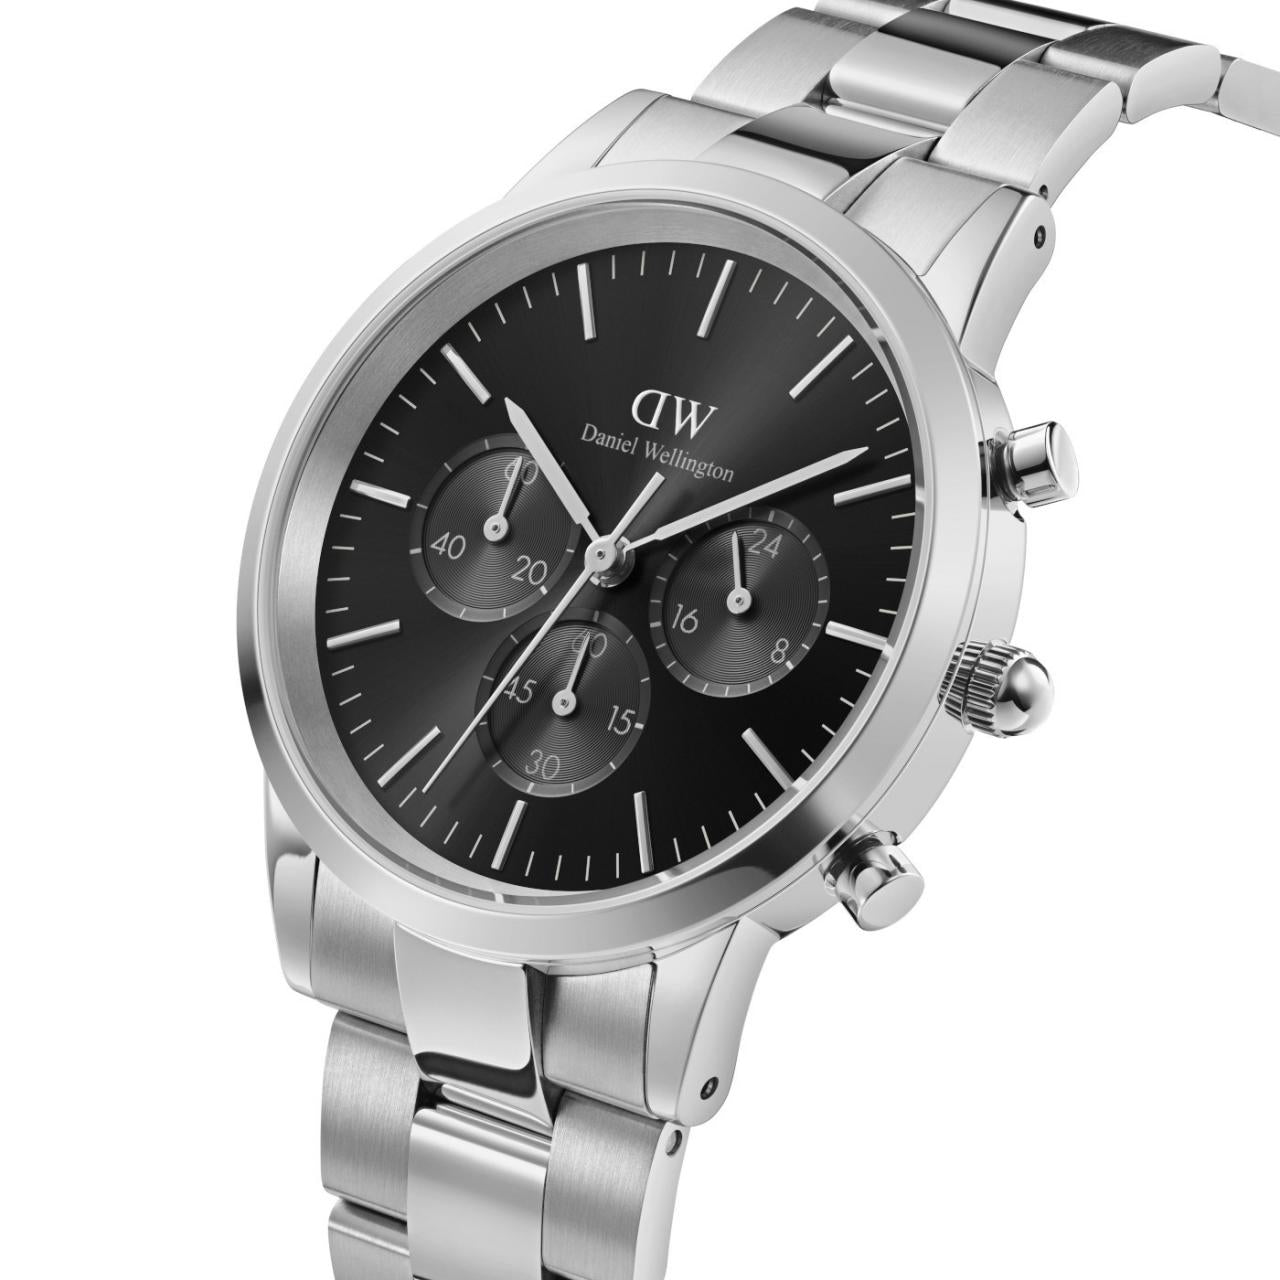 Daniel Wellington 42mm Silver Iconic Chronograph Link Strap Watch with Black Dial